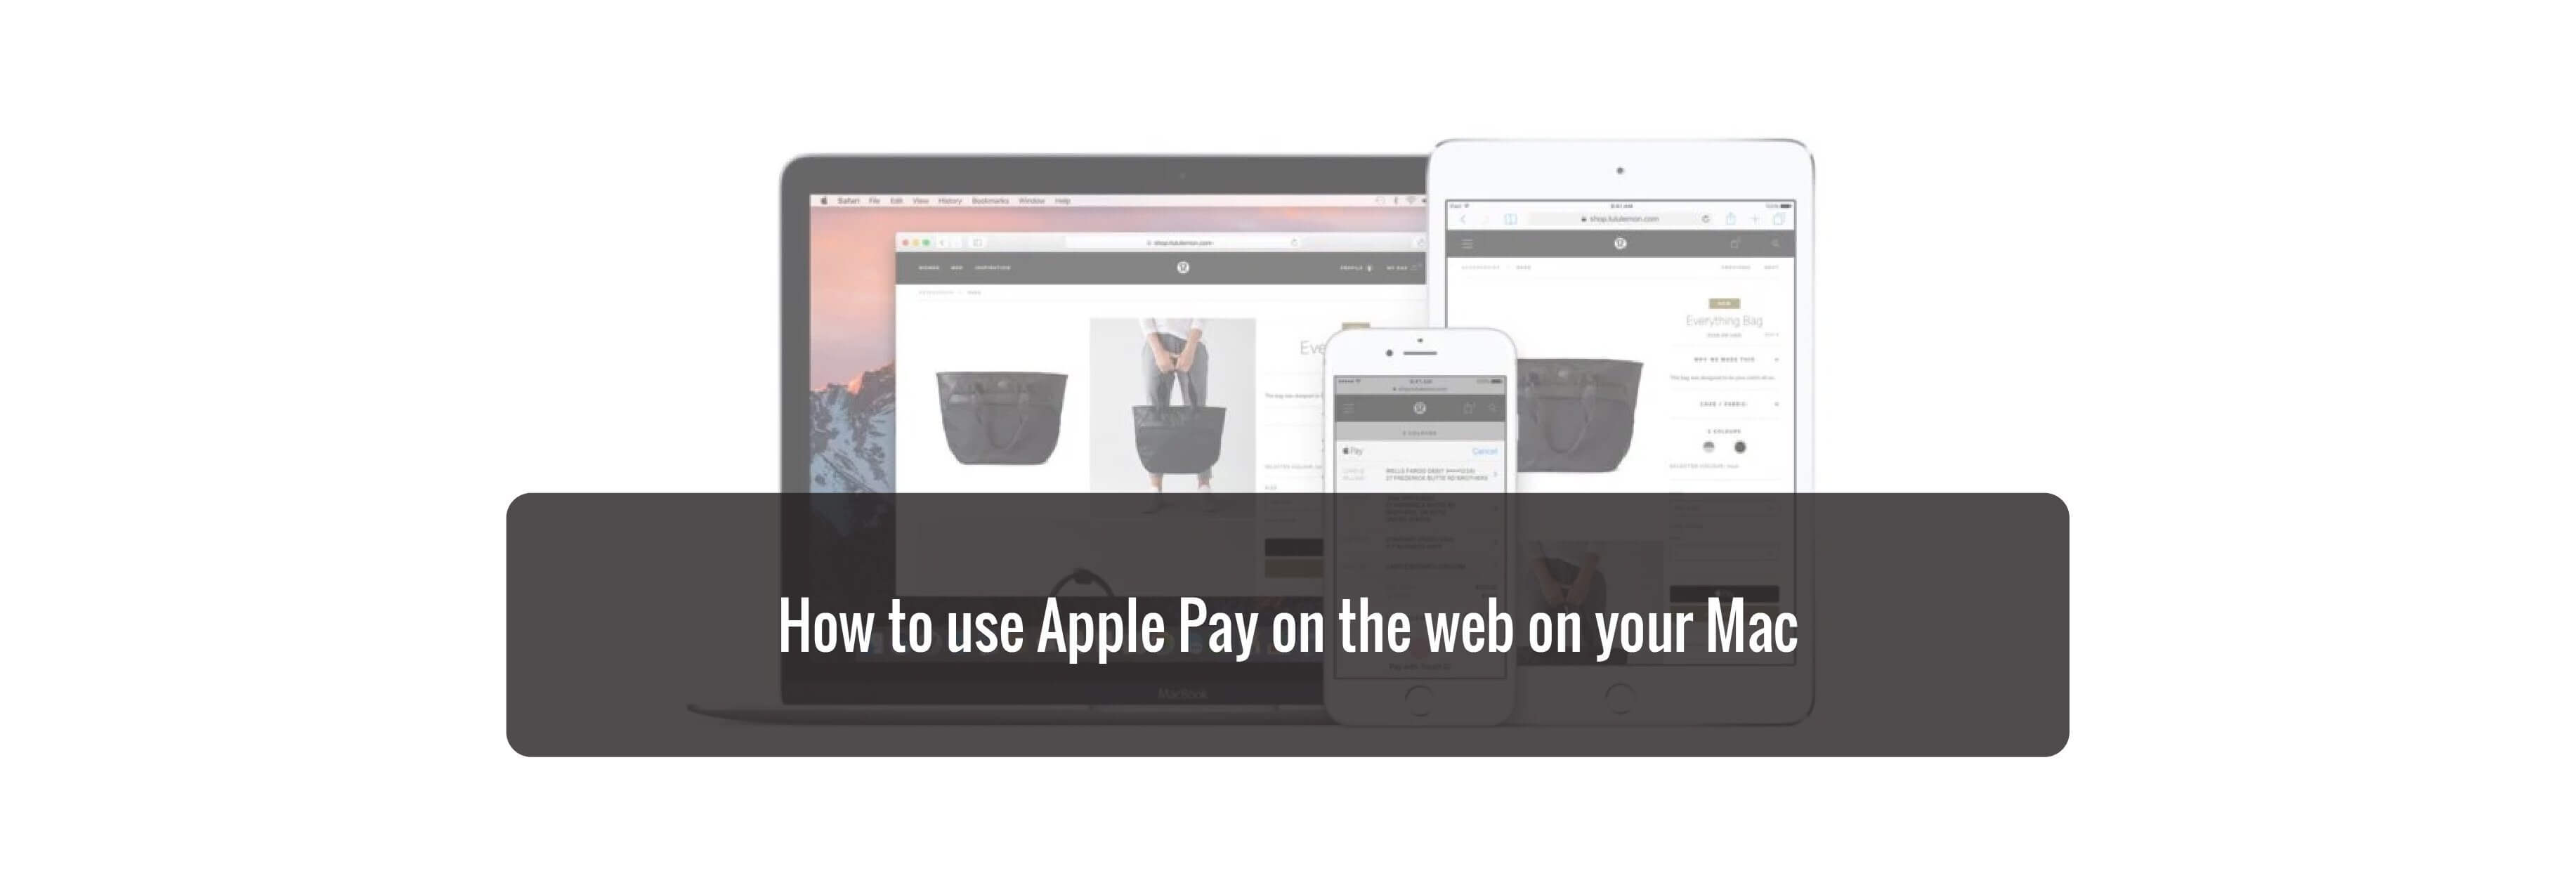 How to use Apple Pay on the web on your Mac